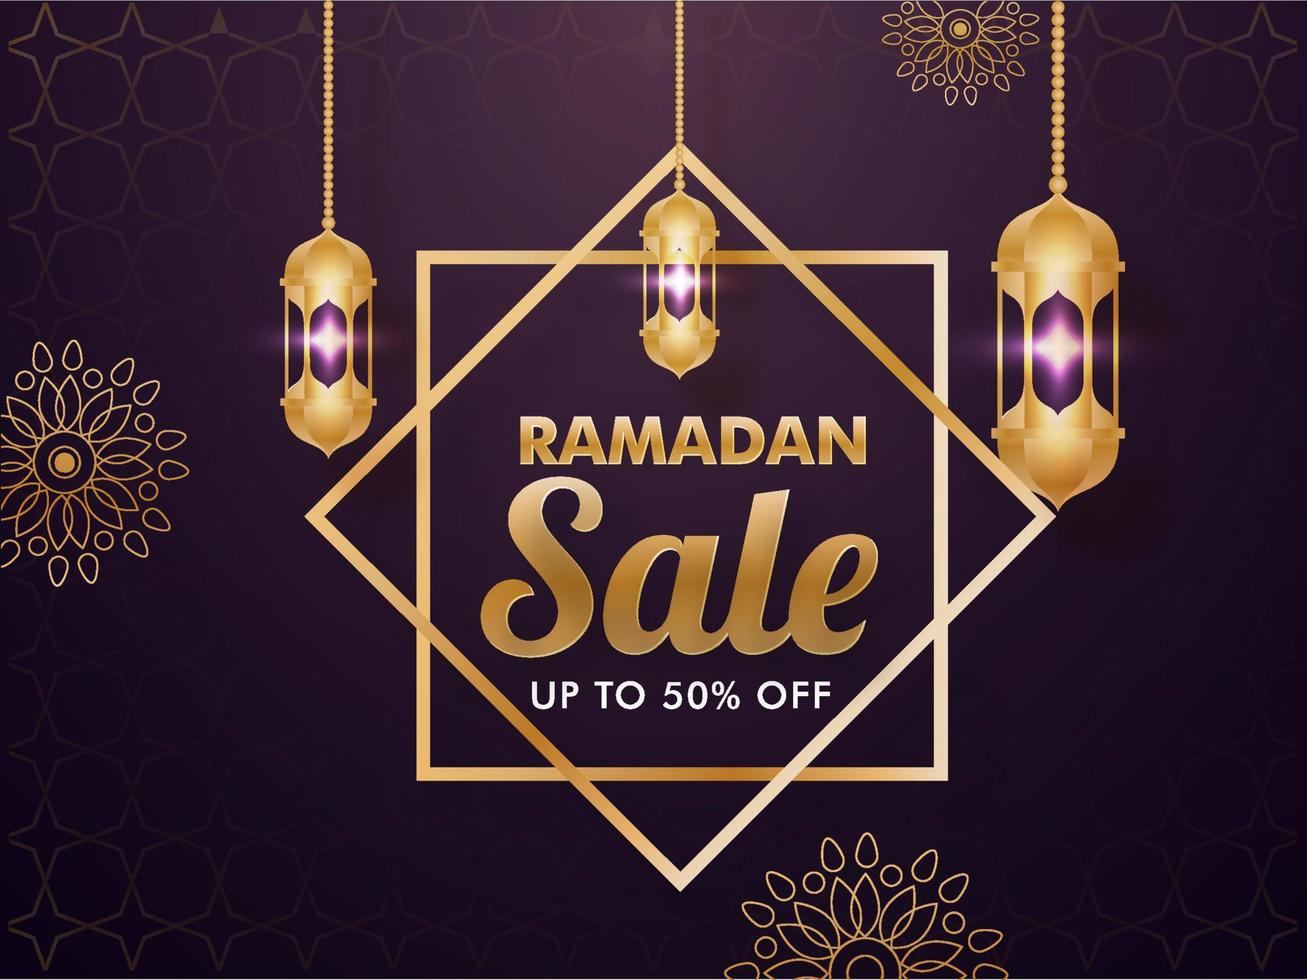 Islamic holy month of Ramdan Sale Concept with Hanging Golden Lanterns on Floral Pattern Decorated Purple Background. vector